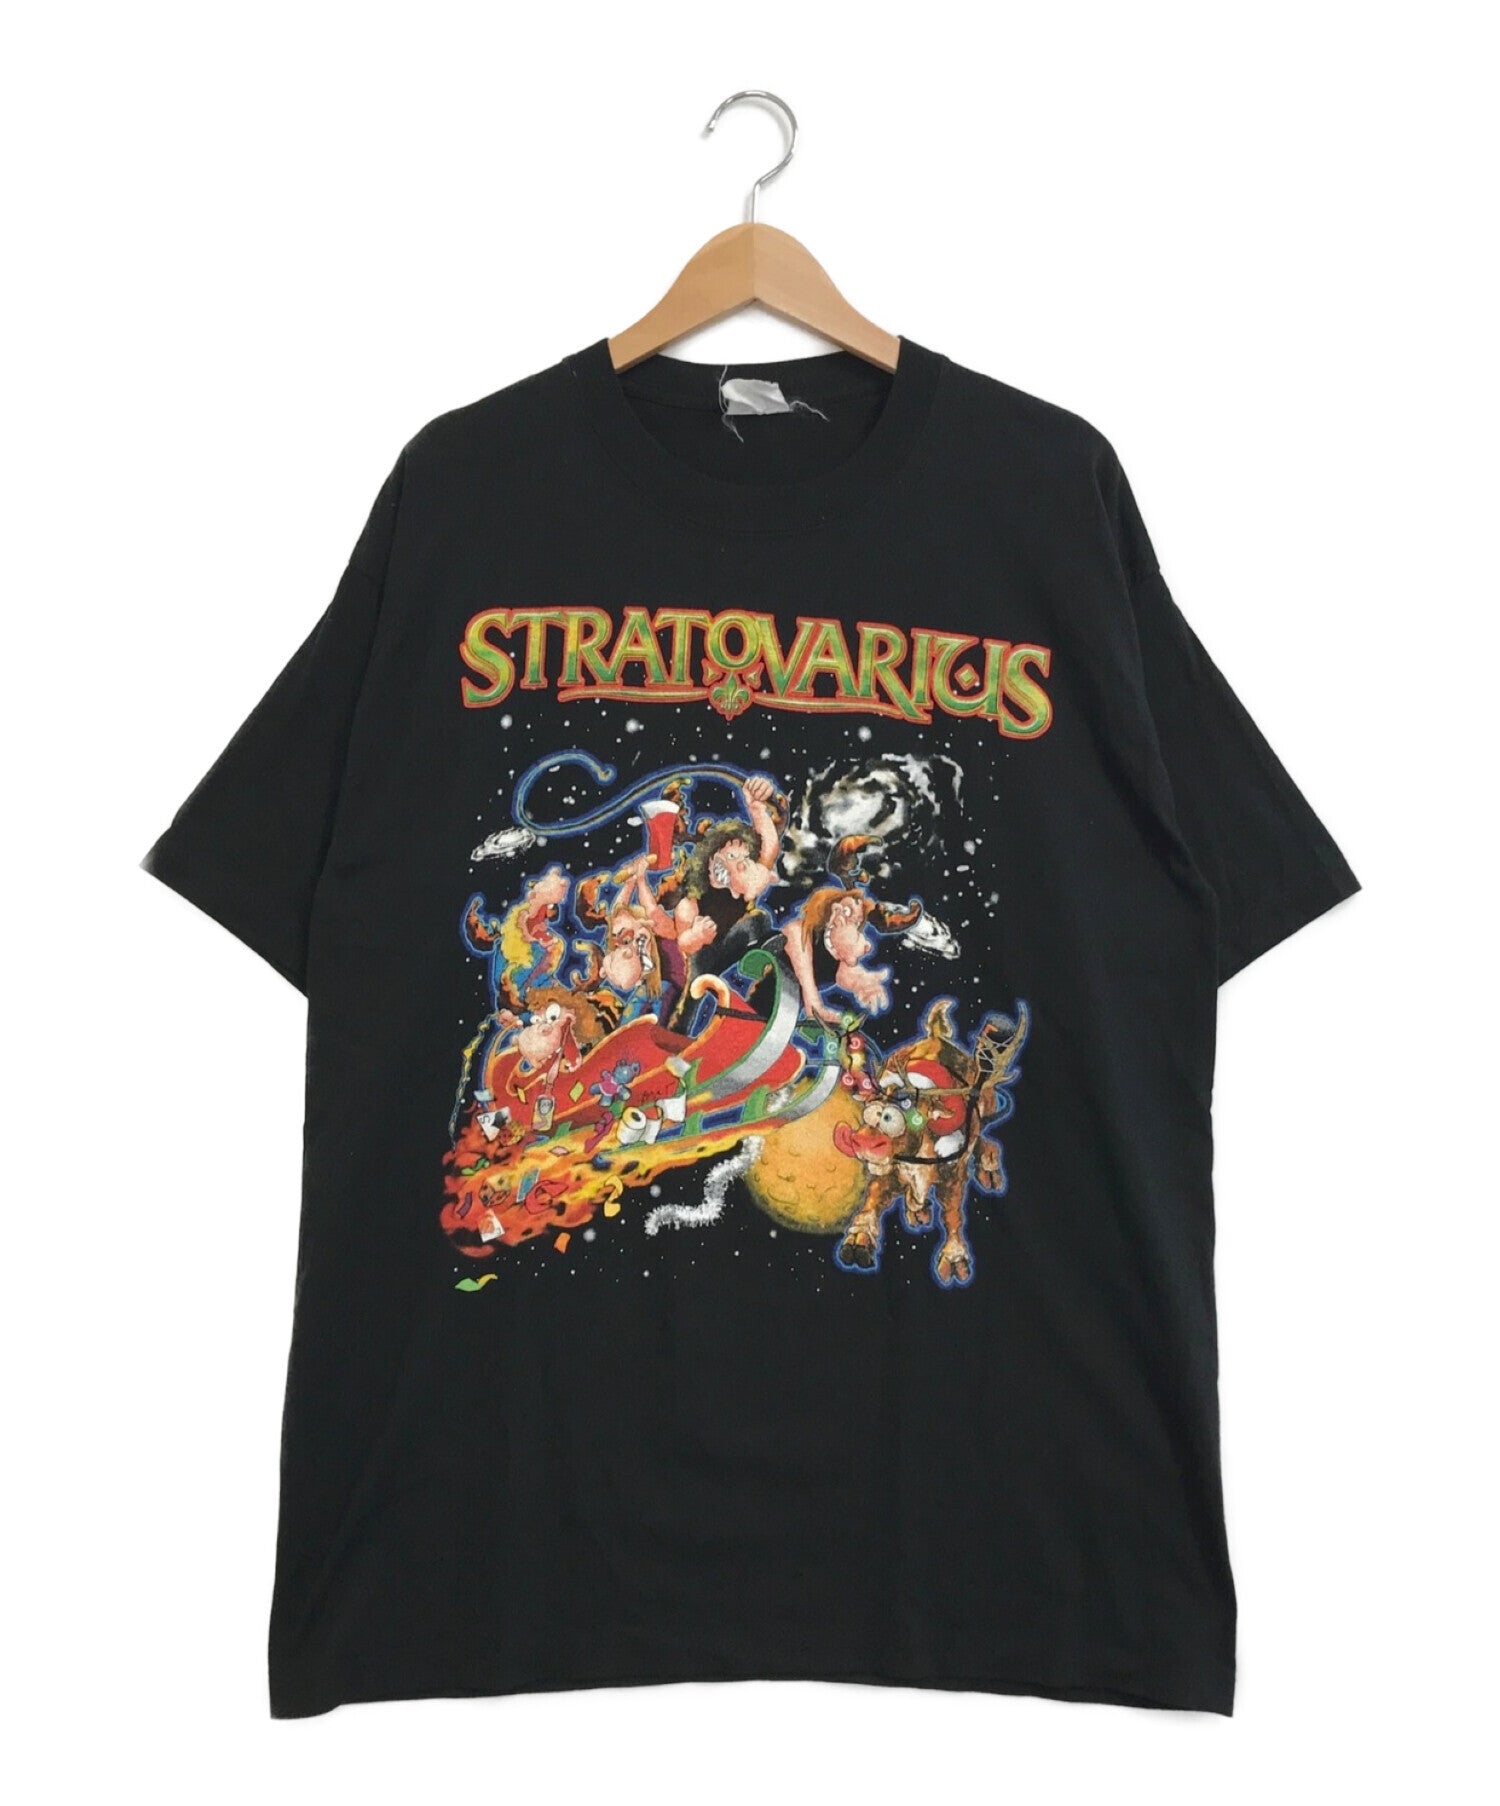 Stratovarius Gifts & Merchandise for Sale